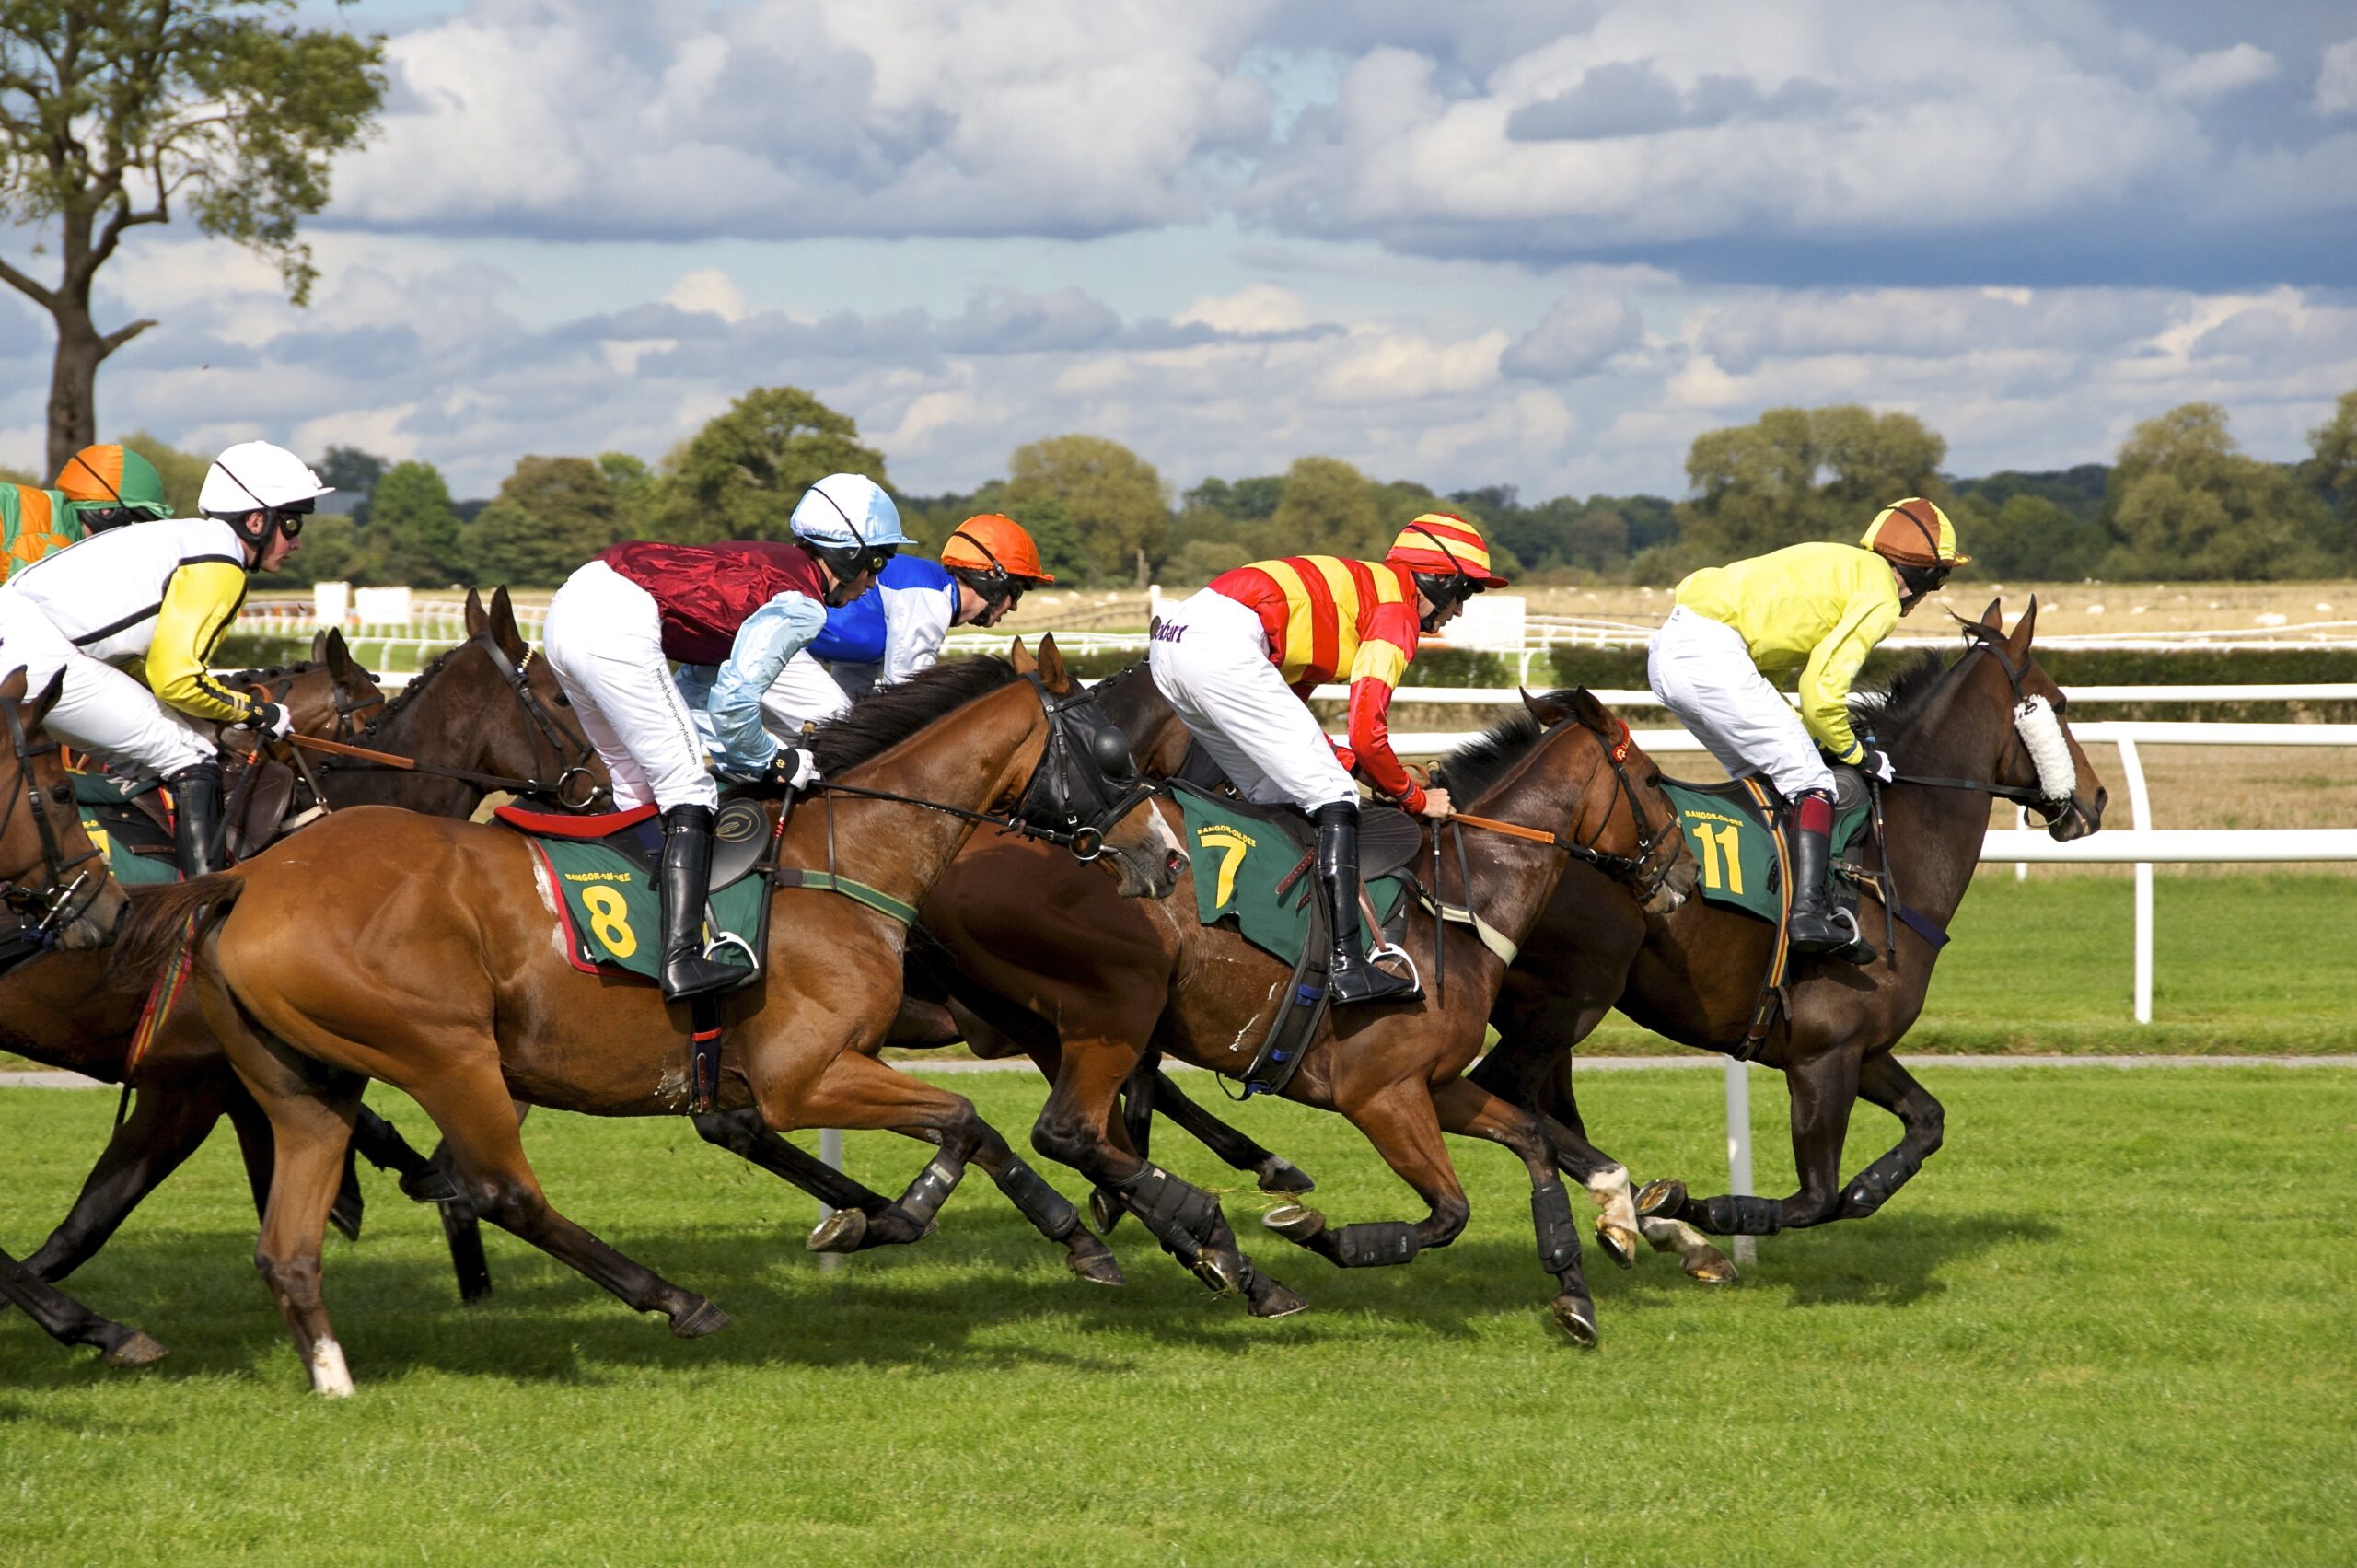 The consequences of horse race reporting: What the research says